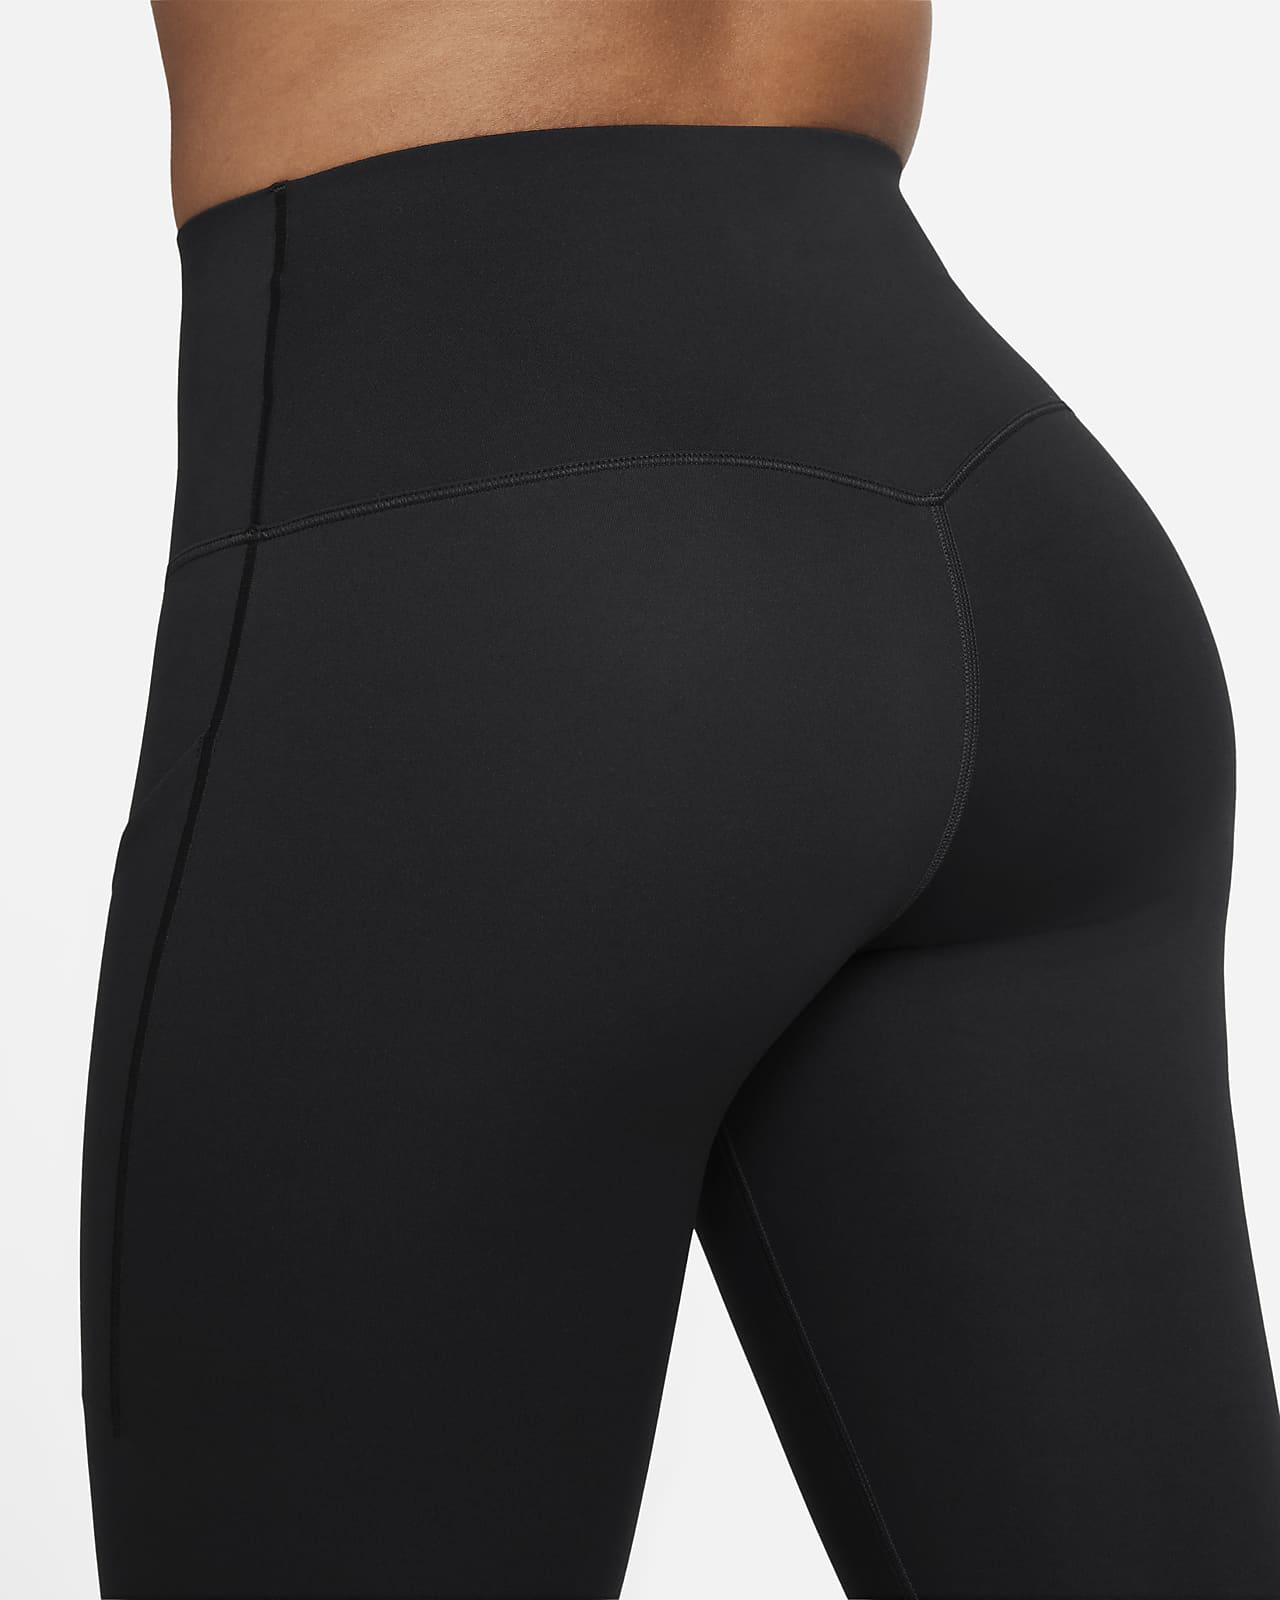 Nike cropped leggings dry fit small patterned  Cropped leggings, Guess  maxi dress, Workout pants black